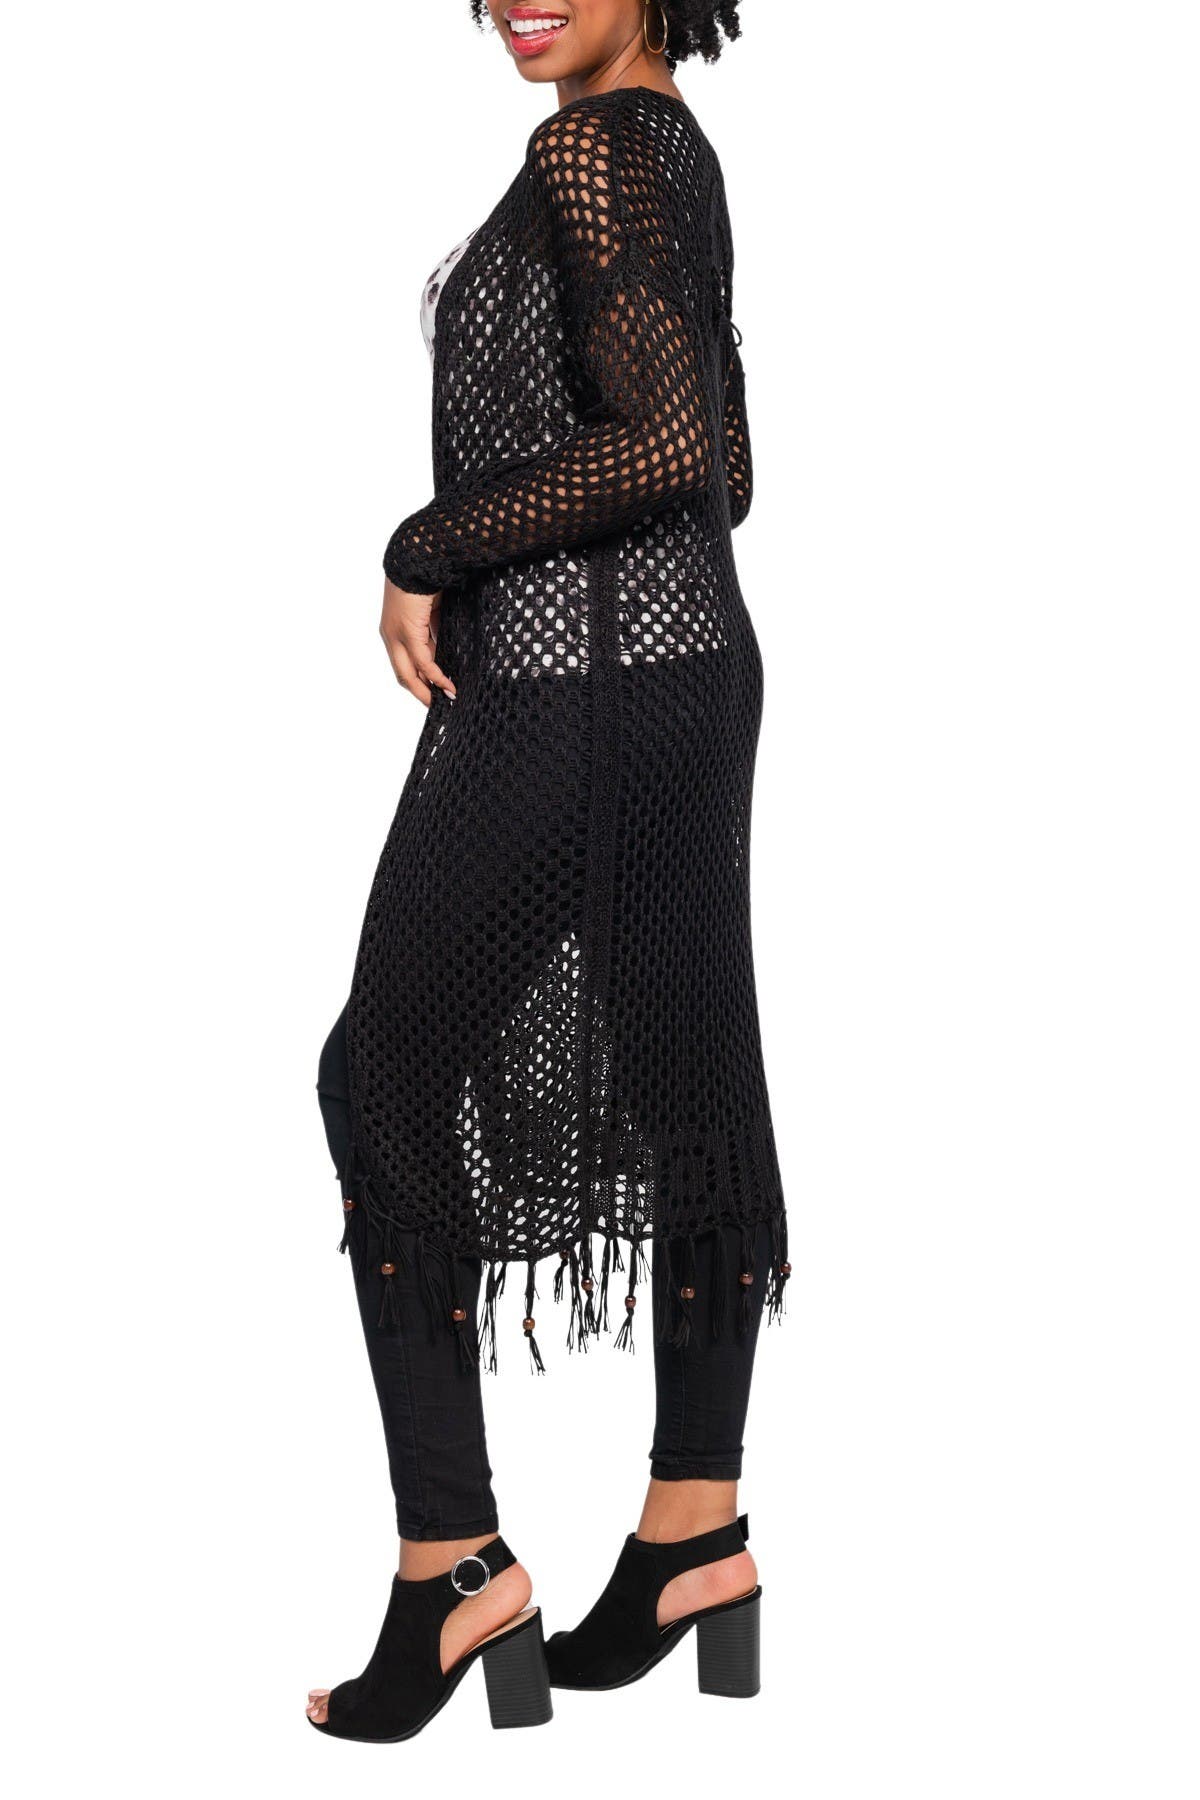 Oneworld Long Sleeve Crochet Duster With Beads In Black